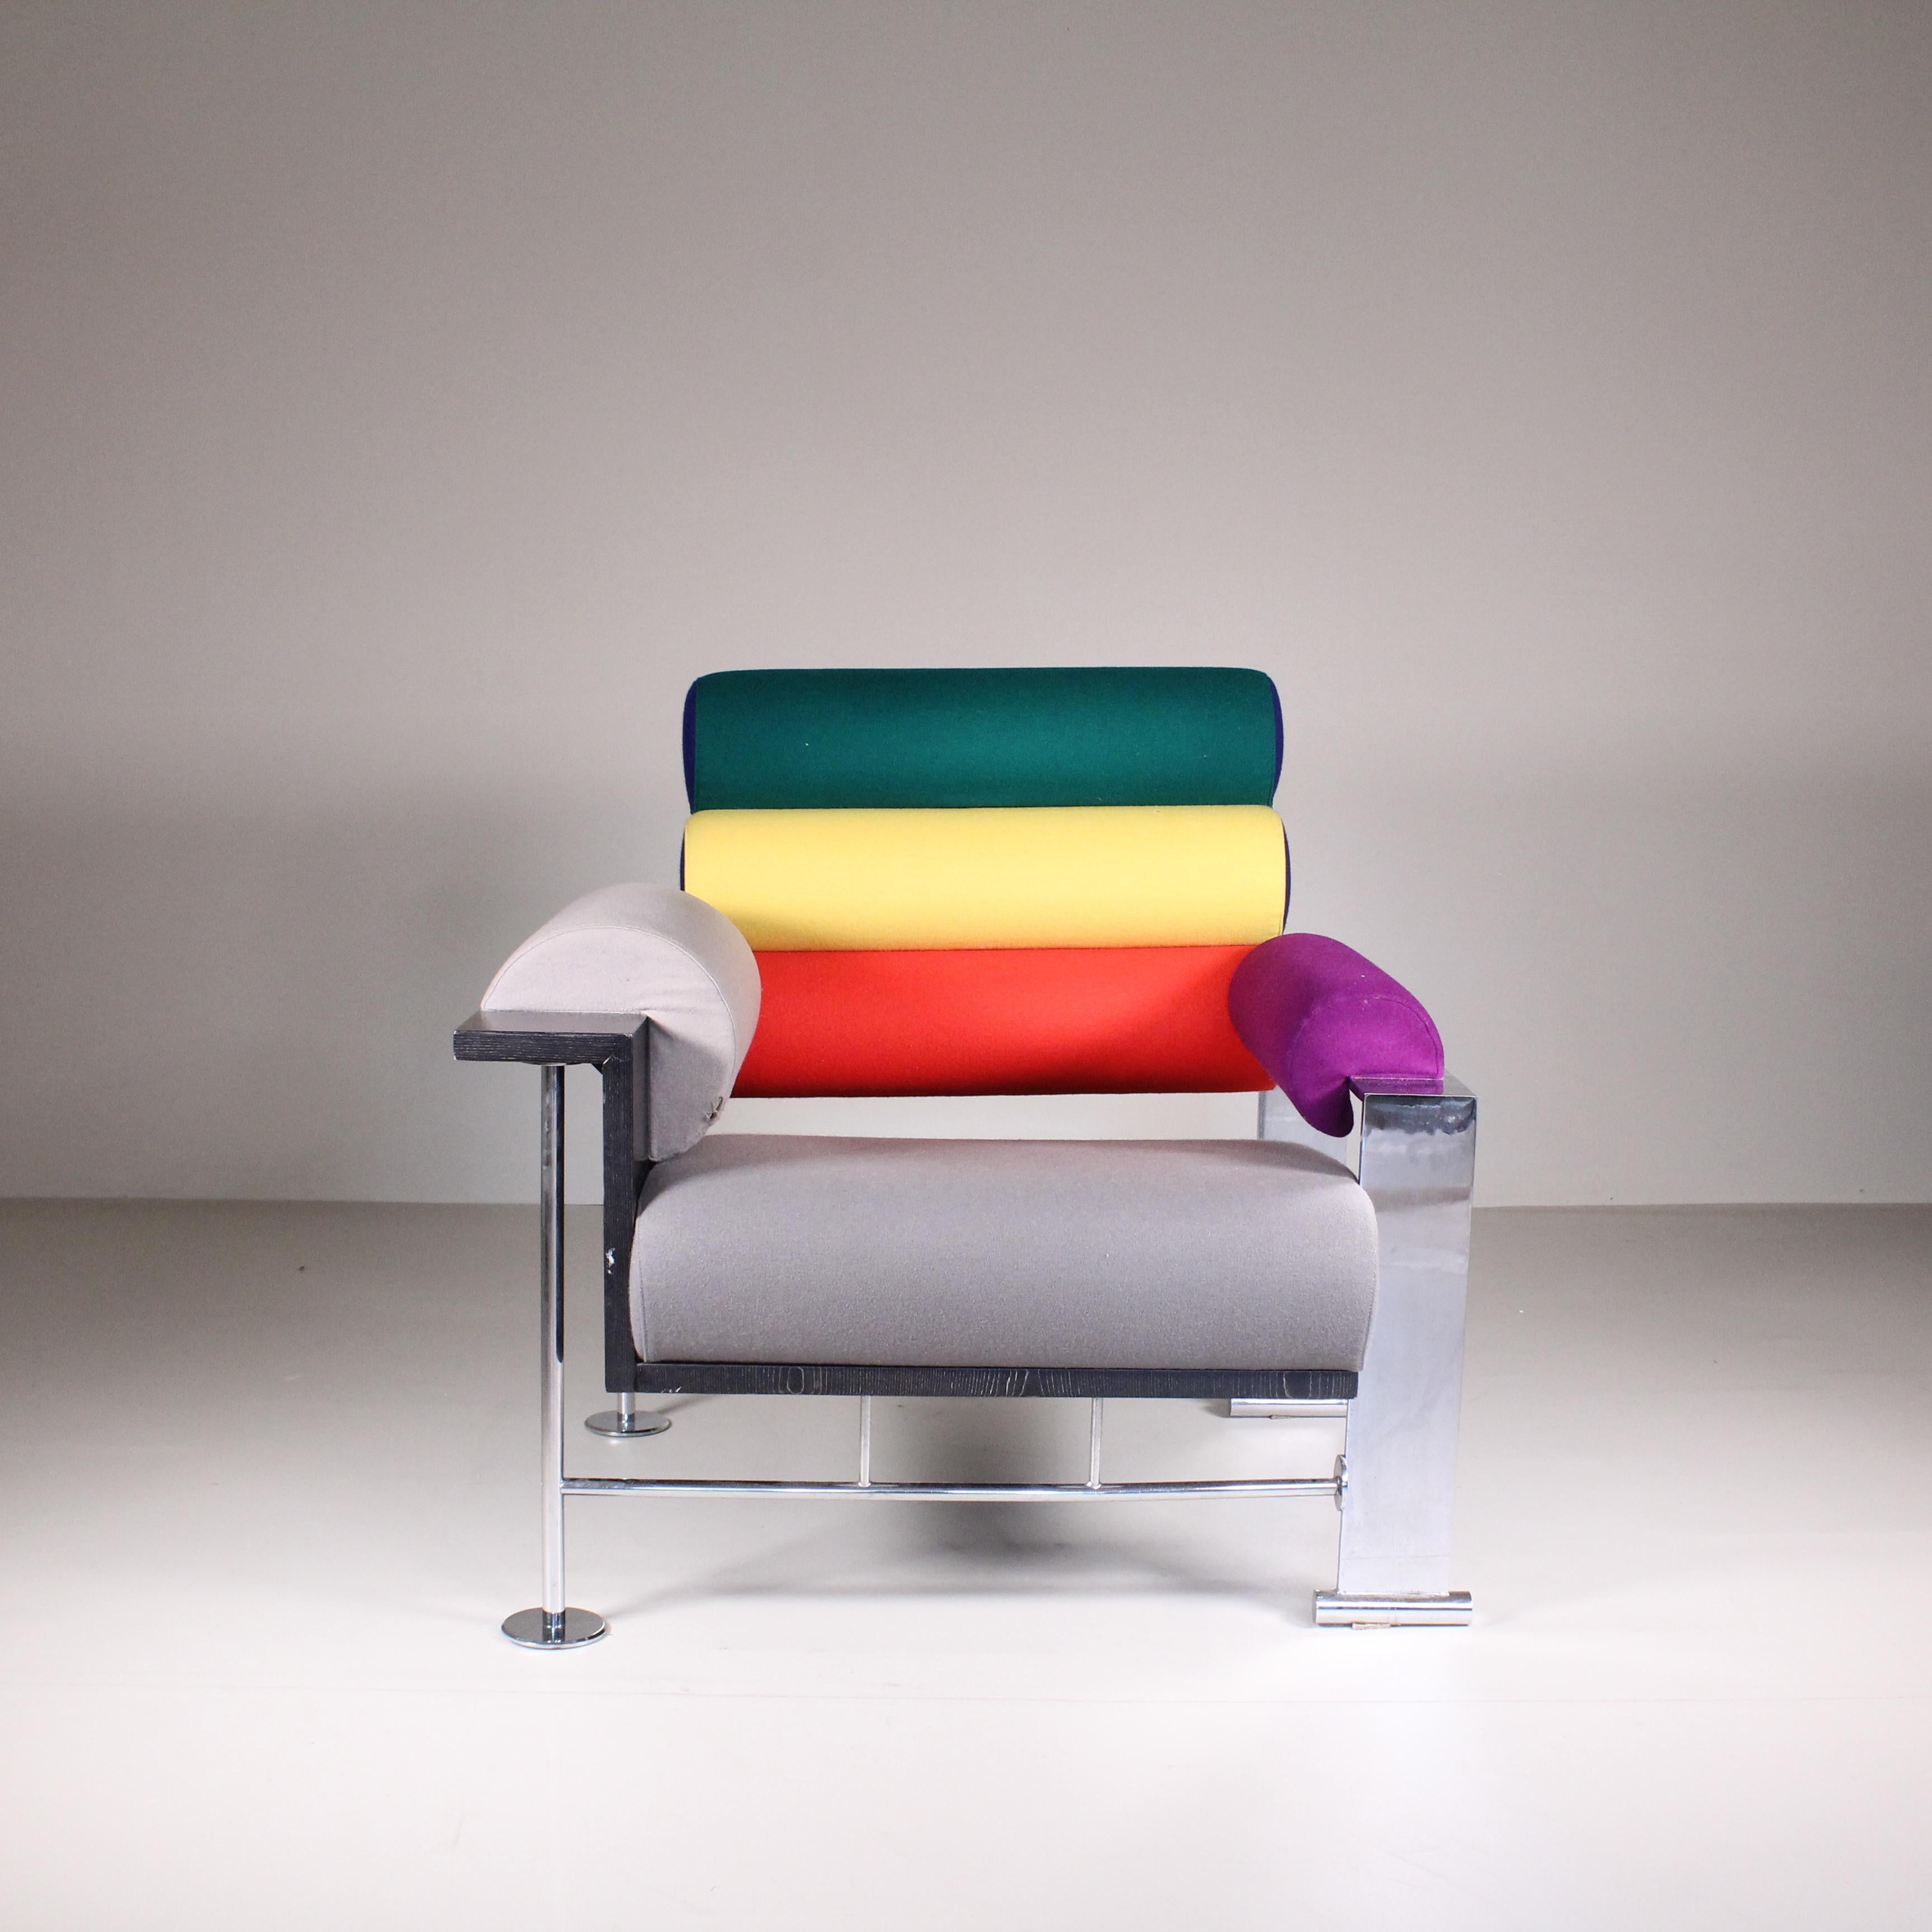 Las Vegas armchair by Peter Shire, 1988 For Sale 3